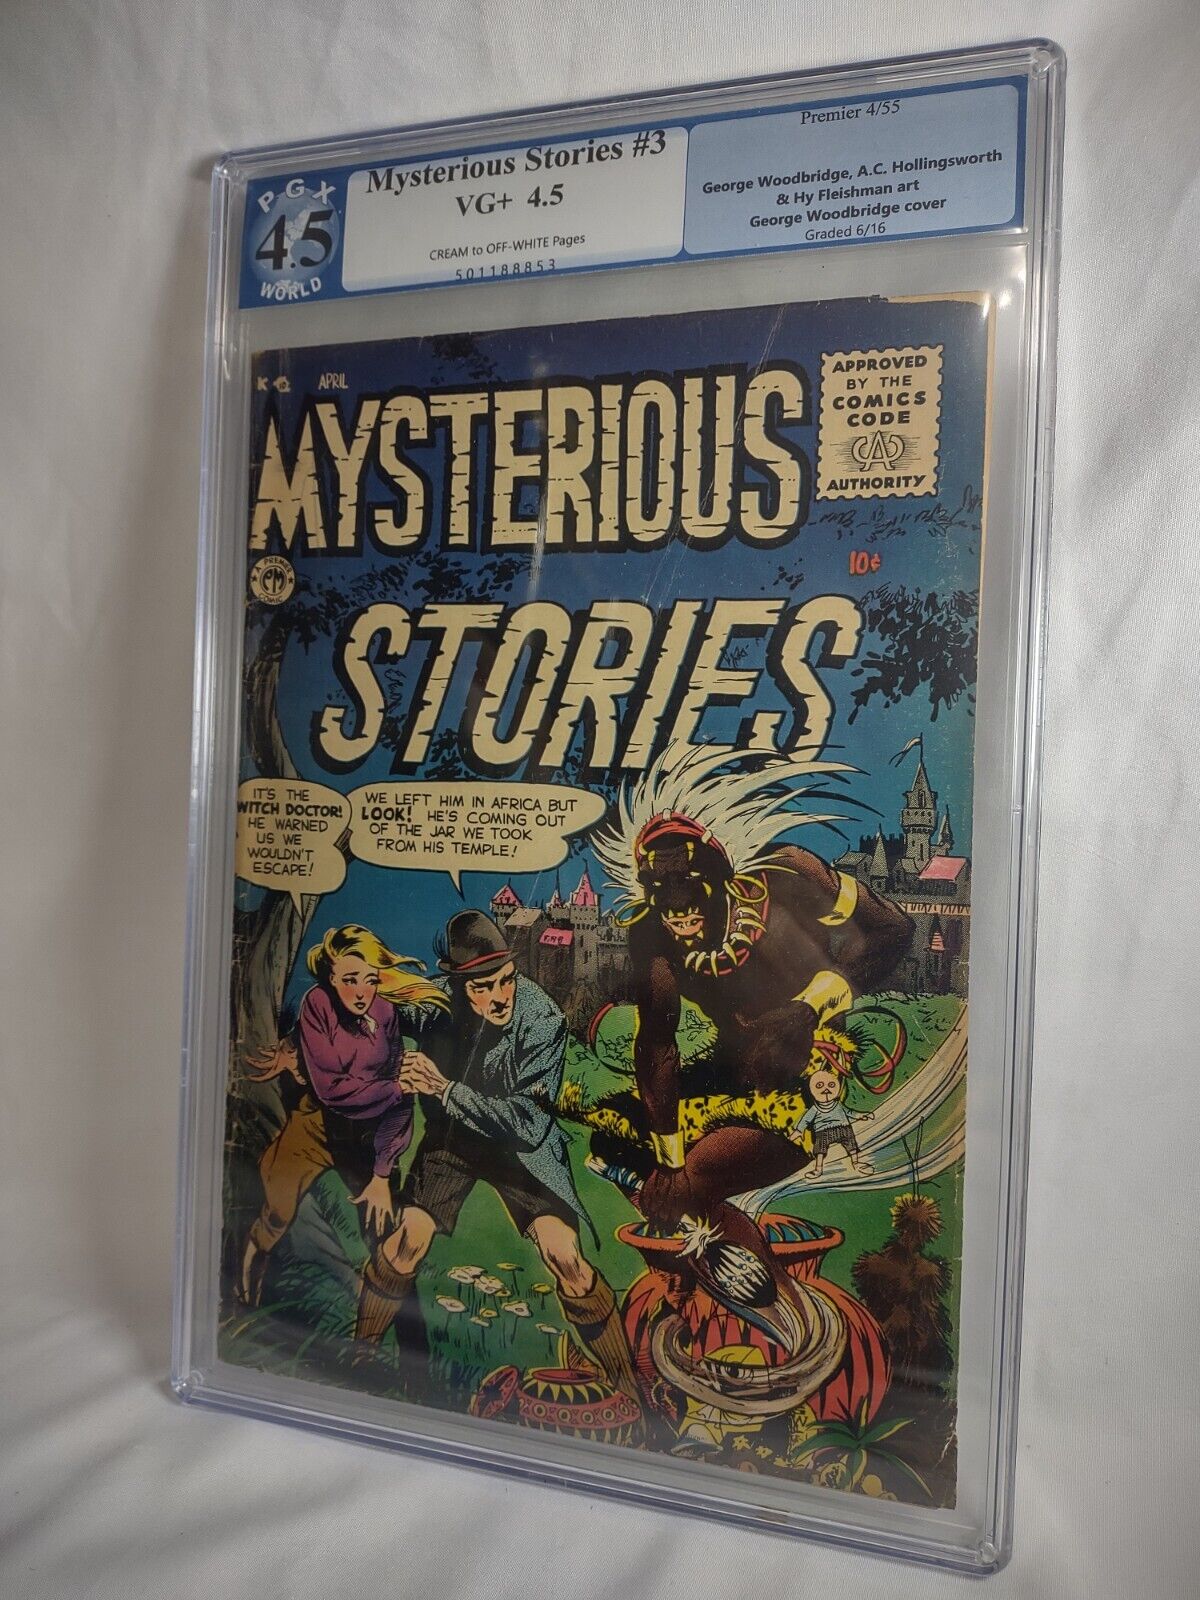 RARE 1955 MYSTERIOUS STORIES #3 WITCH DOCTOR COVER PGX 4.5 GRADED COPY ~NICE~